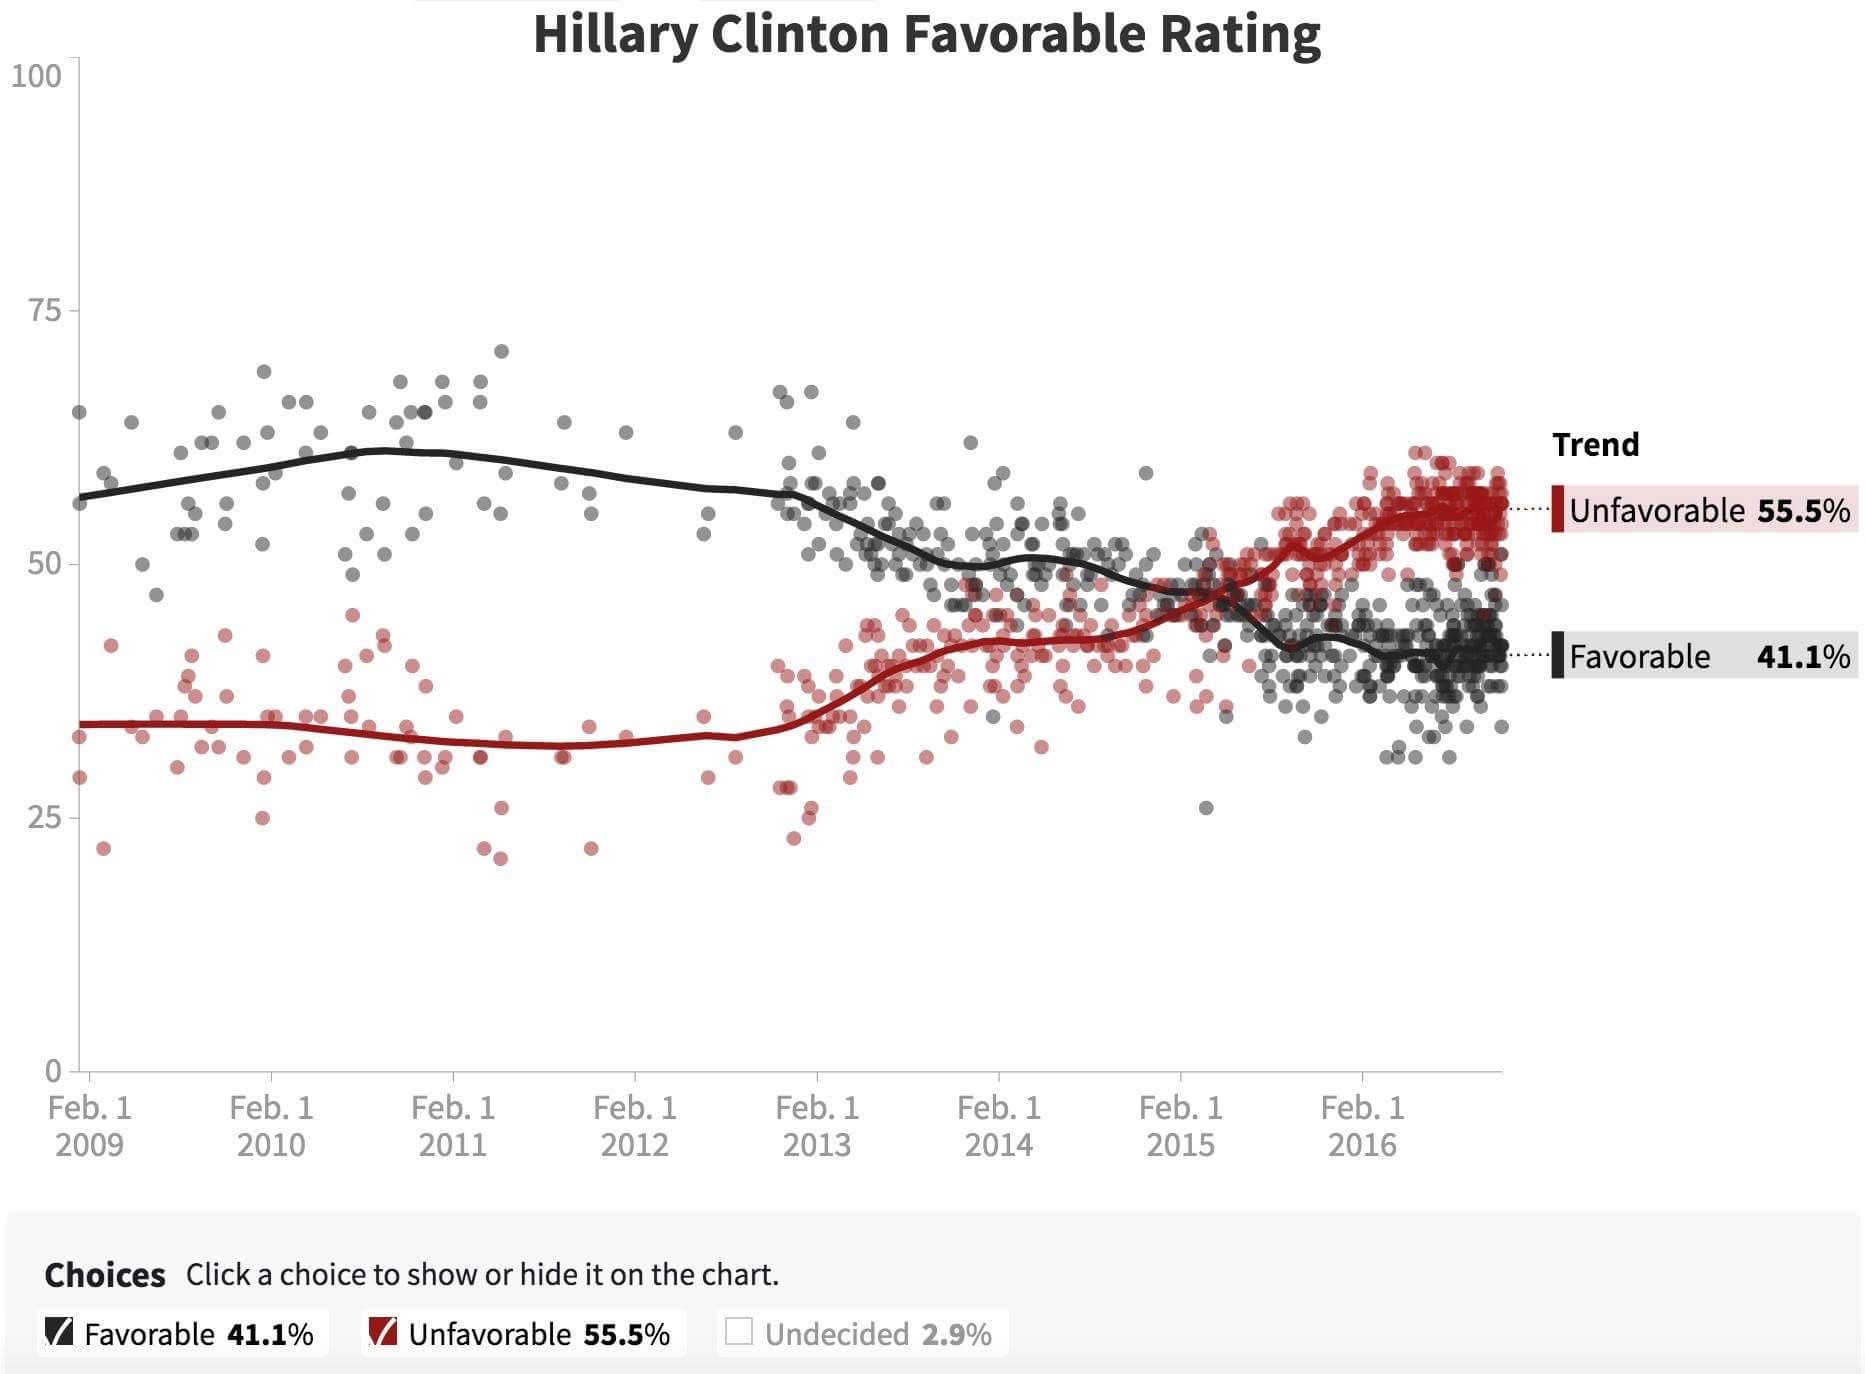 Hillary Clinton’s favorable rating has slumped to a low 41%.